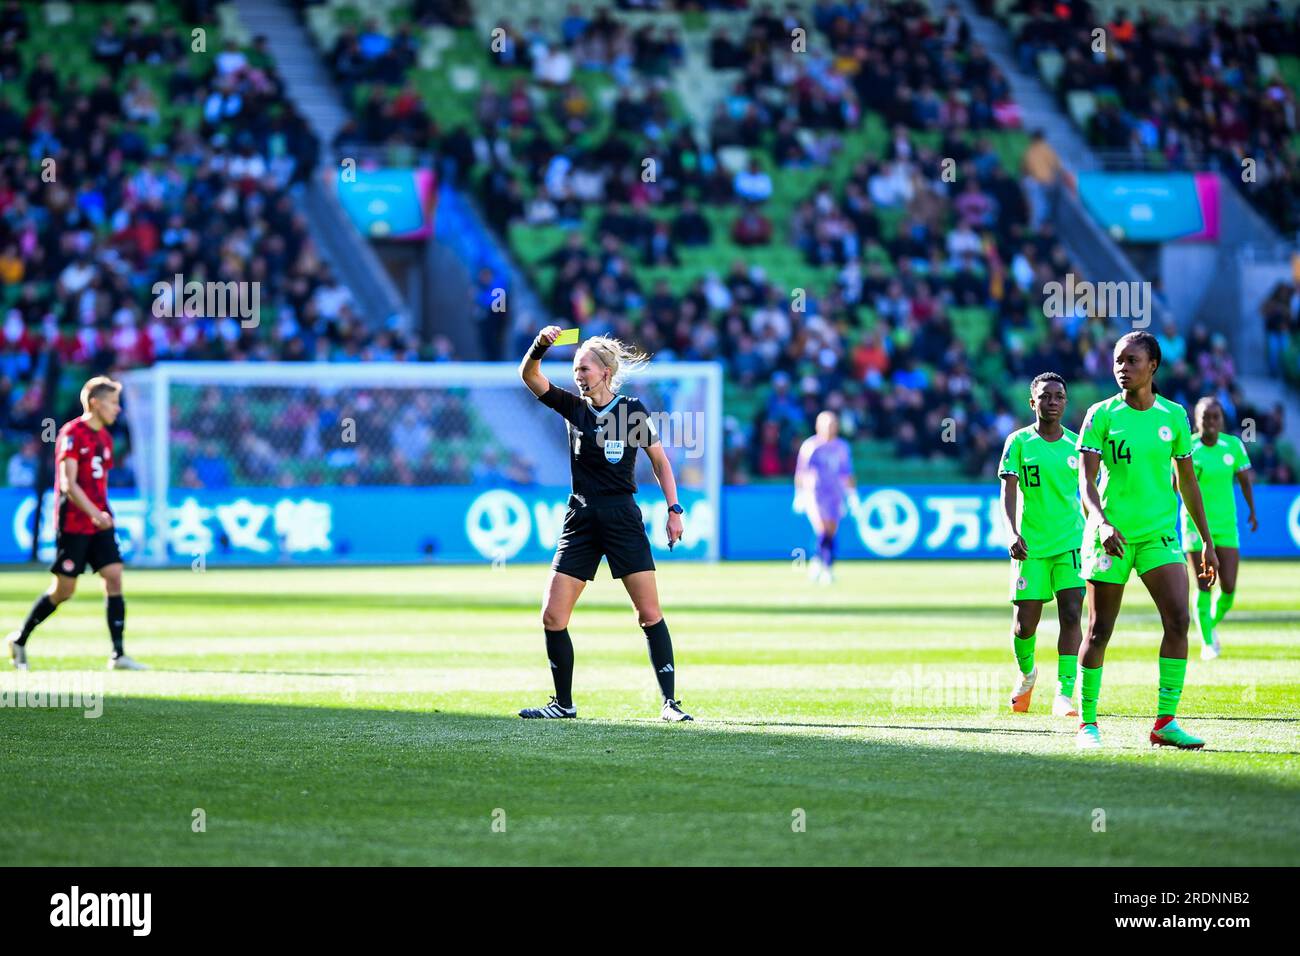 Referee Lina Lehtovaara displays a yellow card during the FIFA Womens World Cup 2023 match between Nigeria and Canada at the Melbourne Rectangular Stadium